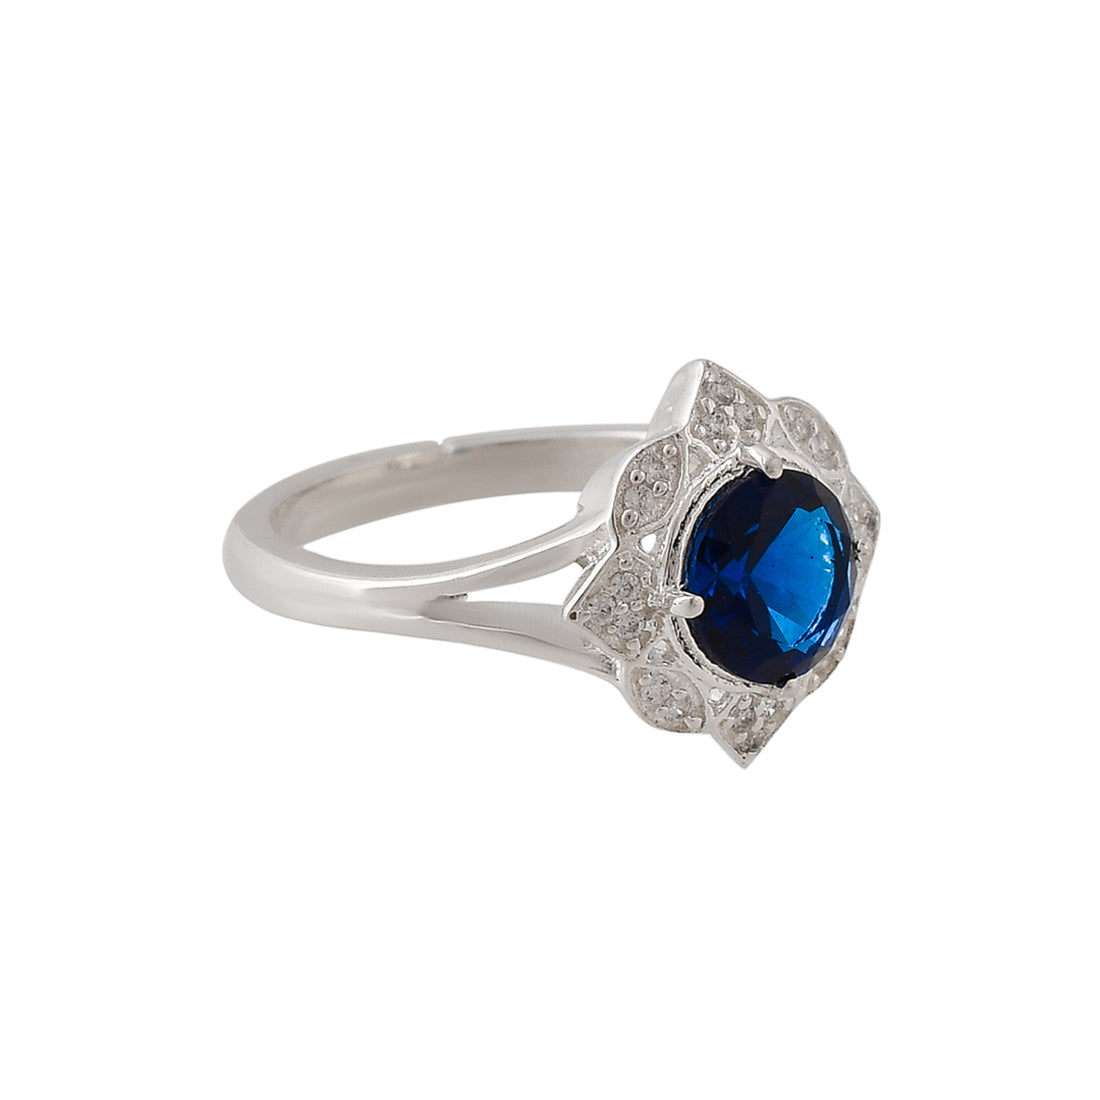 Women's Oval Cut Navy Blue Sapphire Sterling Silver Adjustable Ring - Voylla